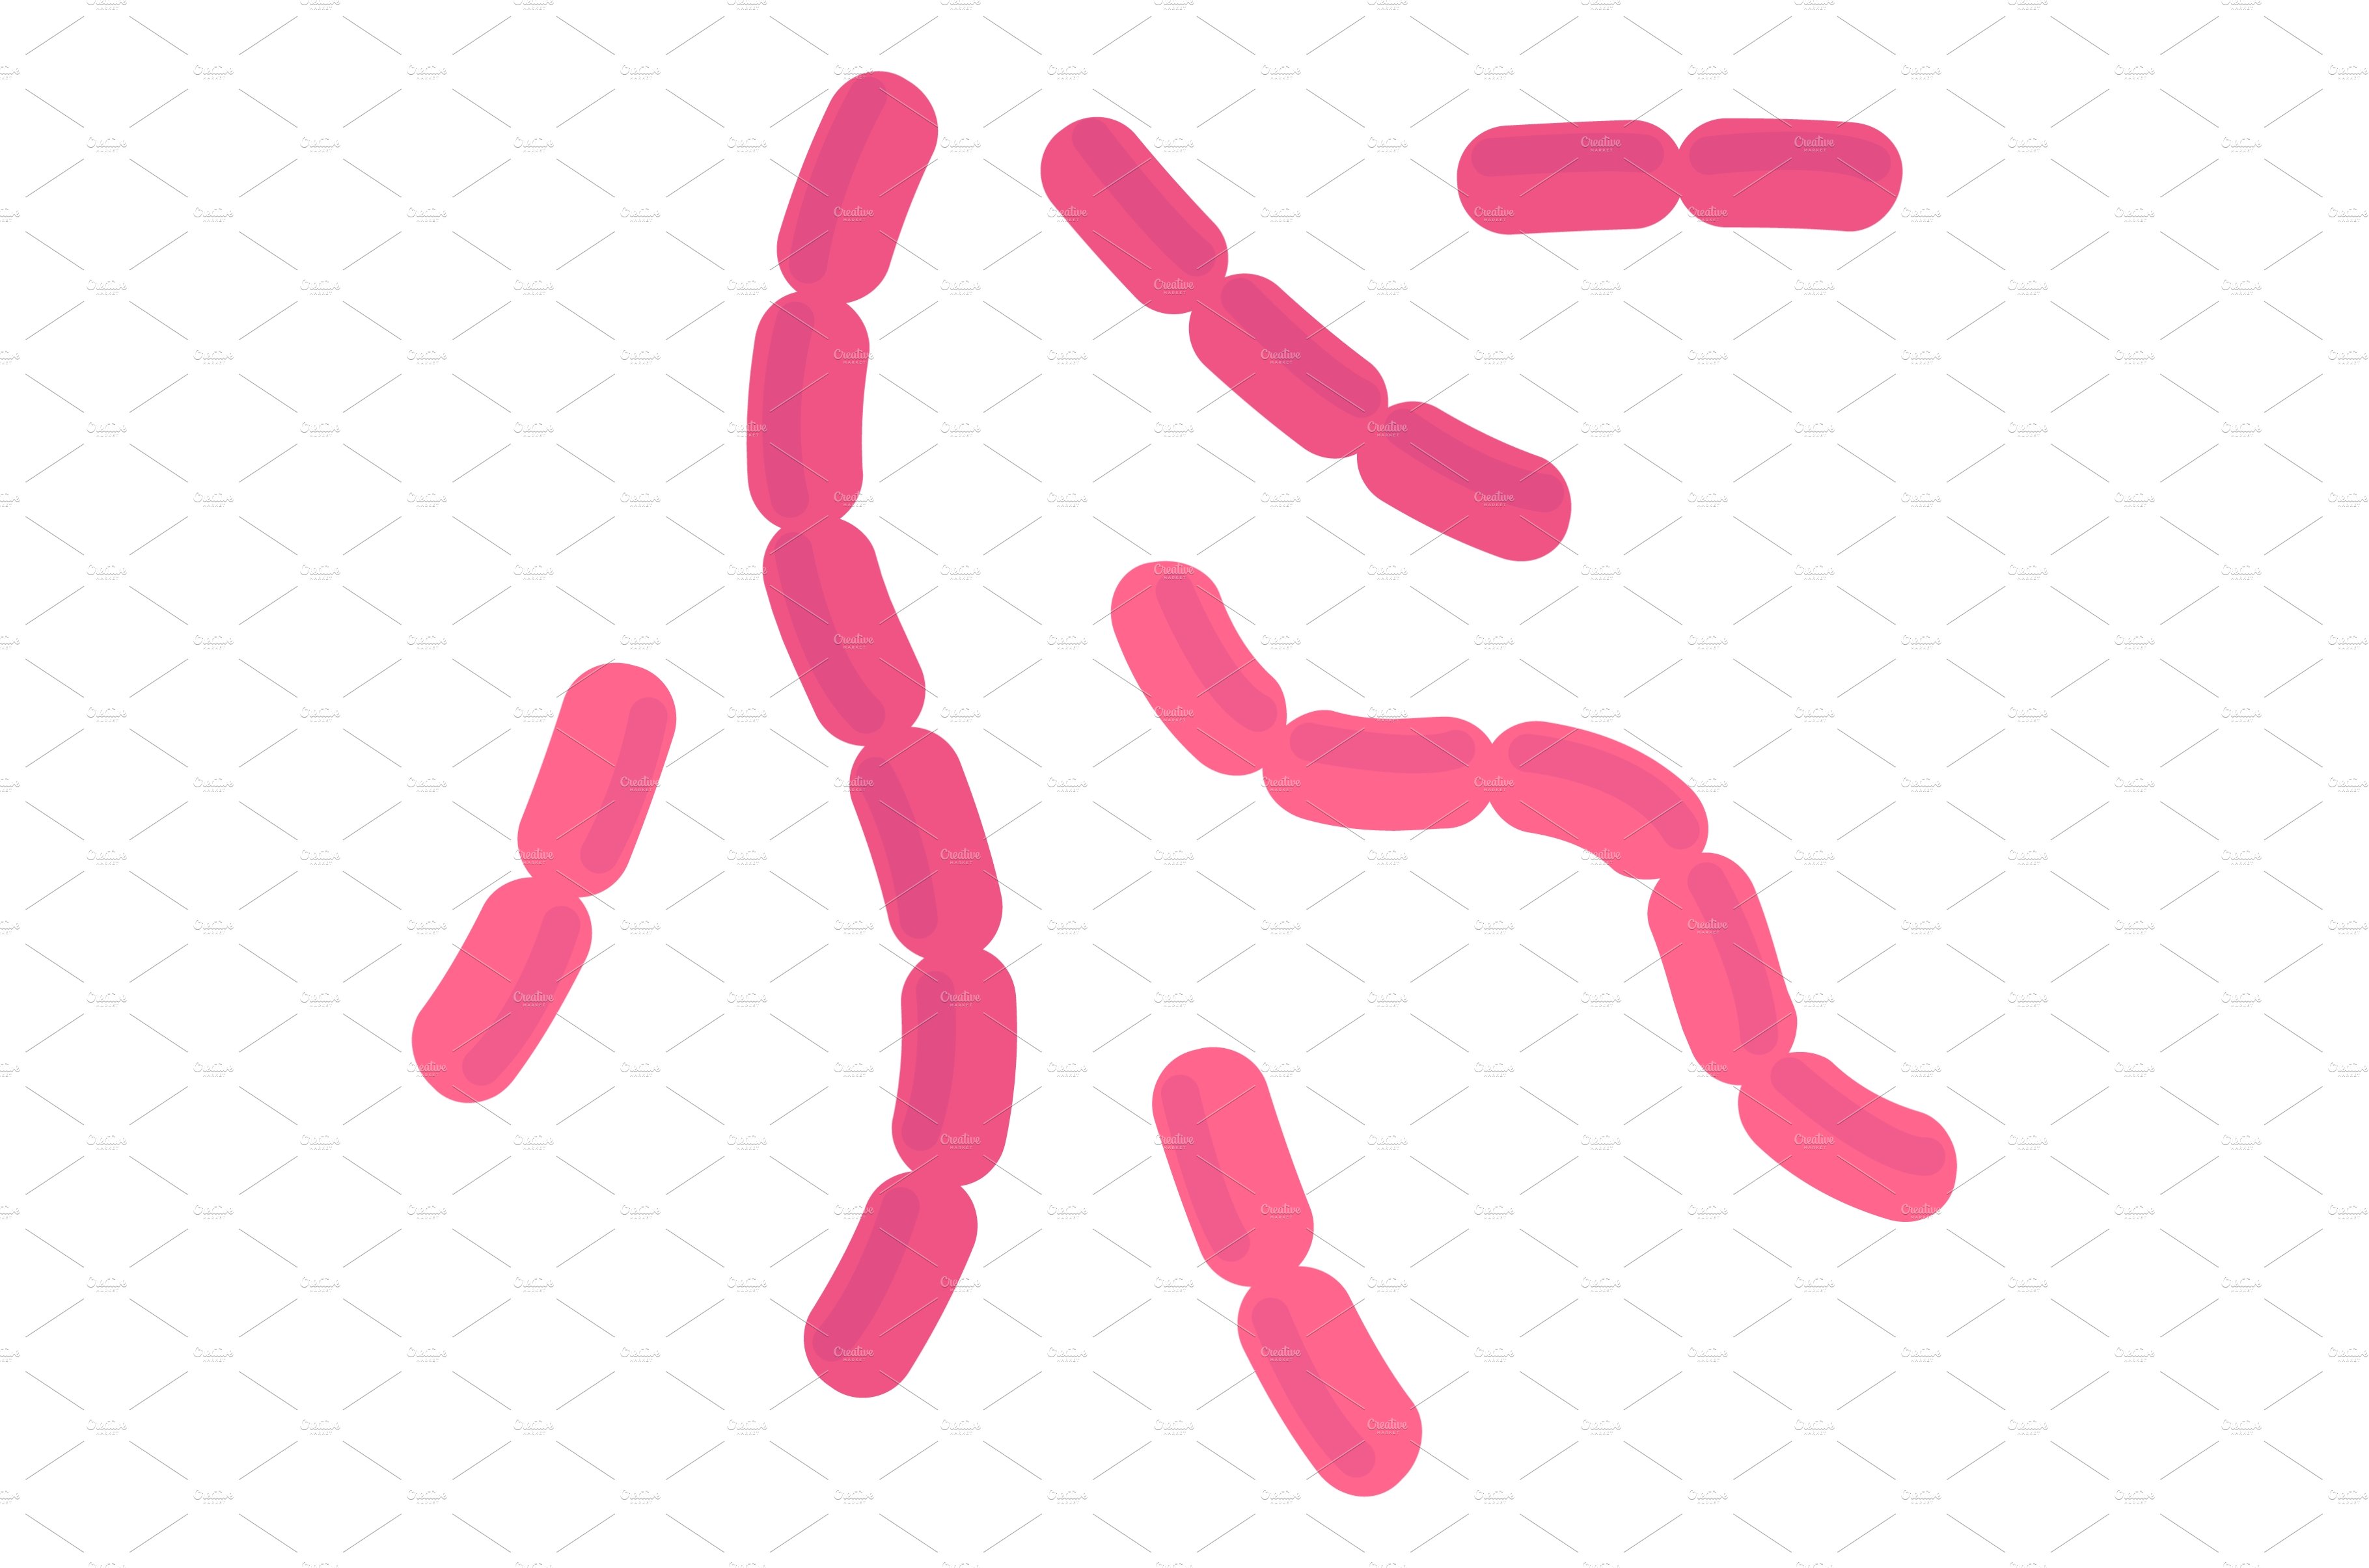 Bacilli bacteria. Pink rod cells of cover image.